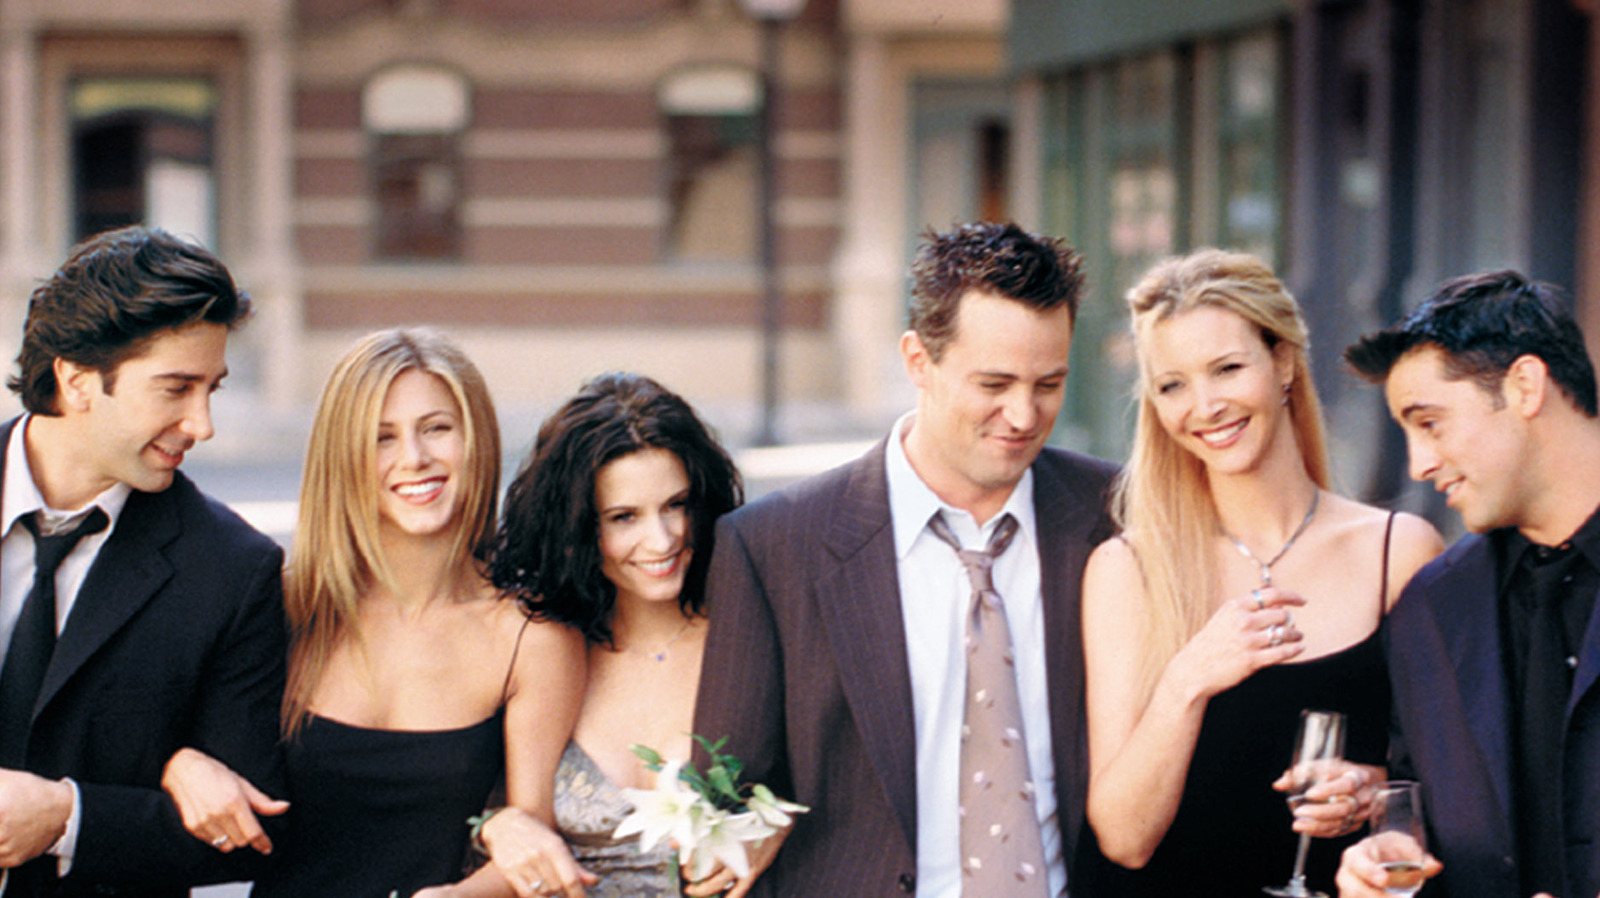 Friends Cast Salaries: How Much Do They Make Now and Then - Parade